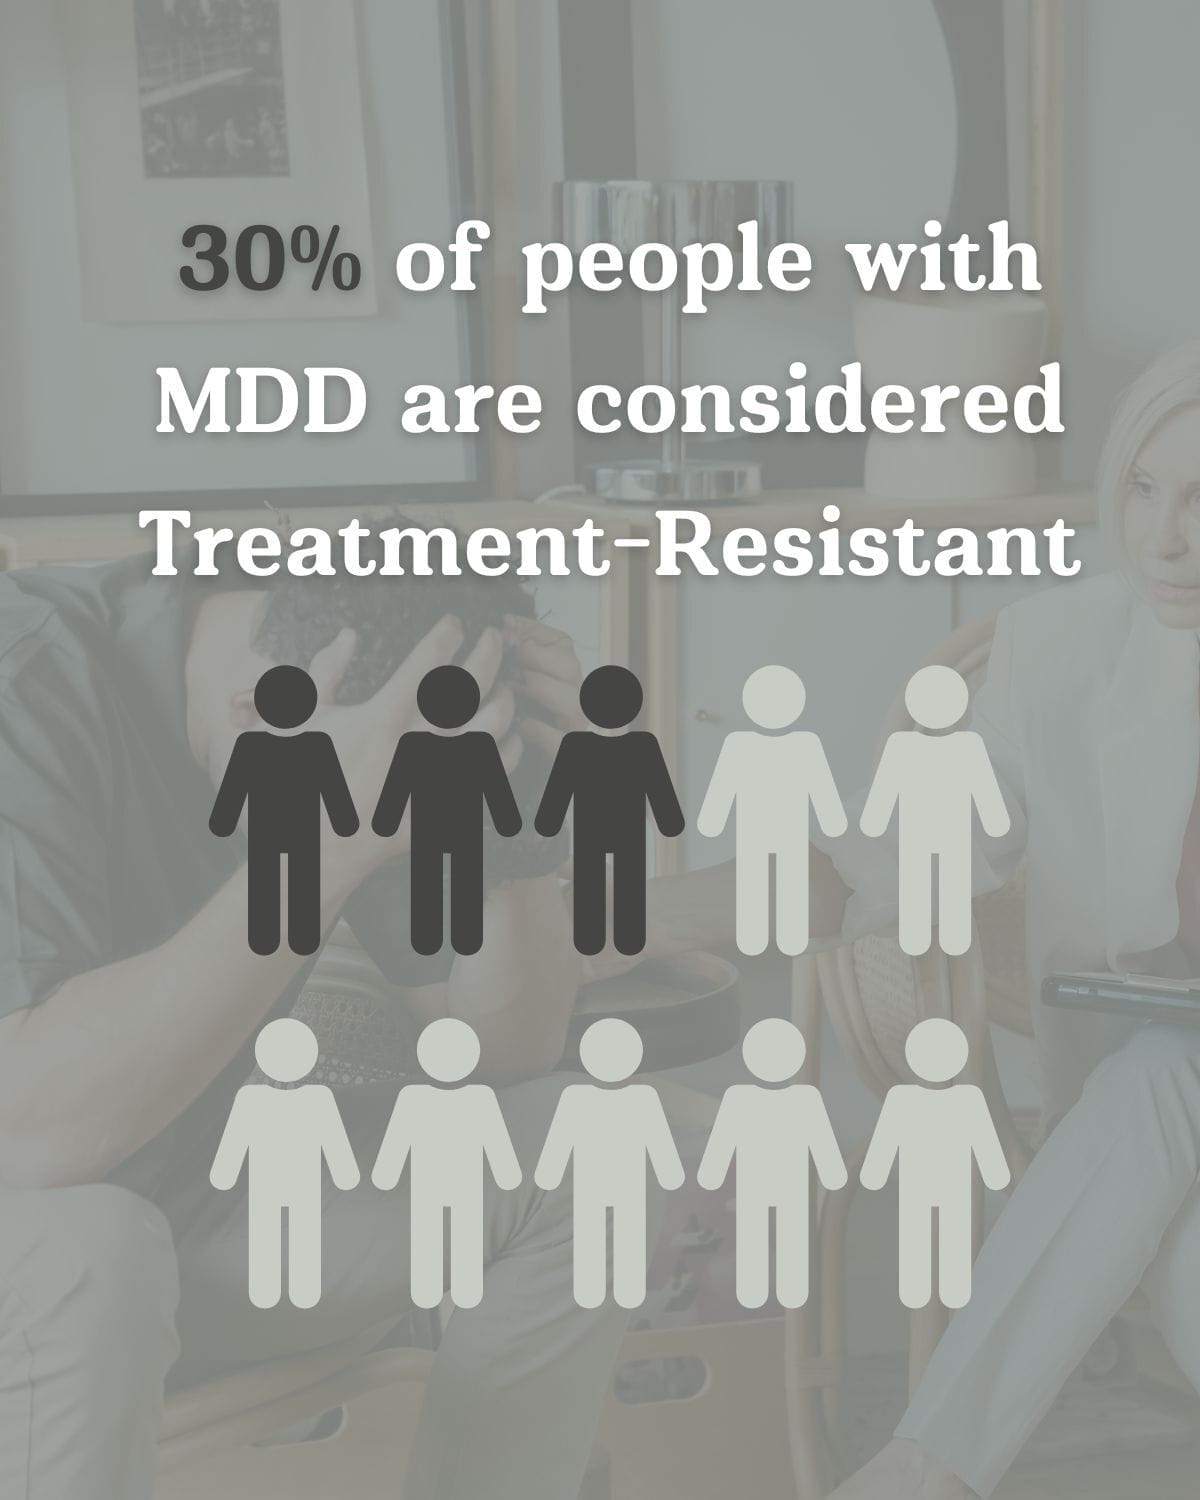 Treatment Resistant Depression occurs in 30% of people experiencing Major Depressive Disorder